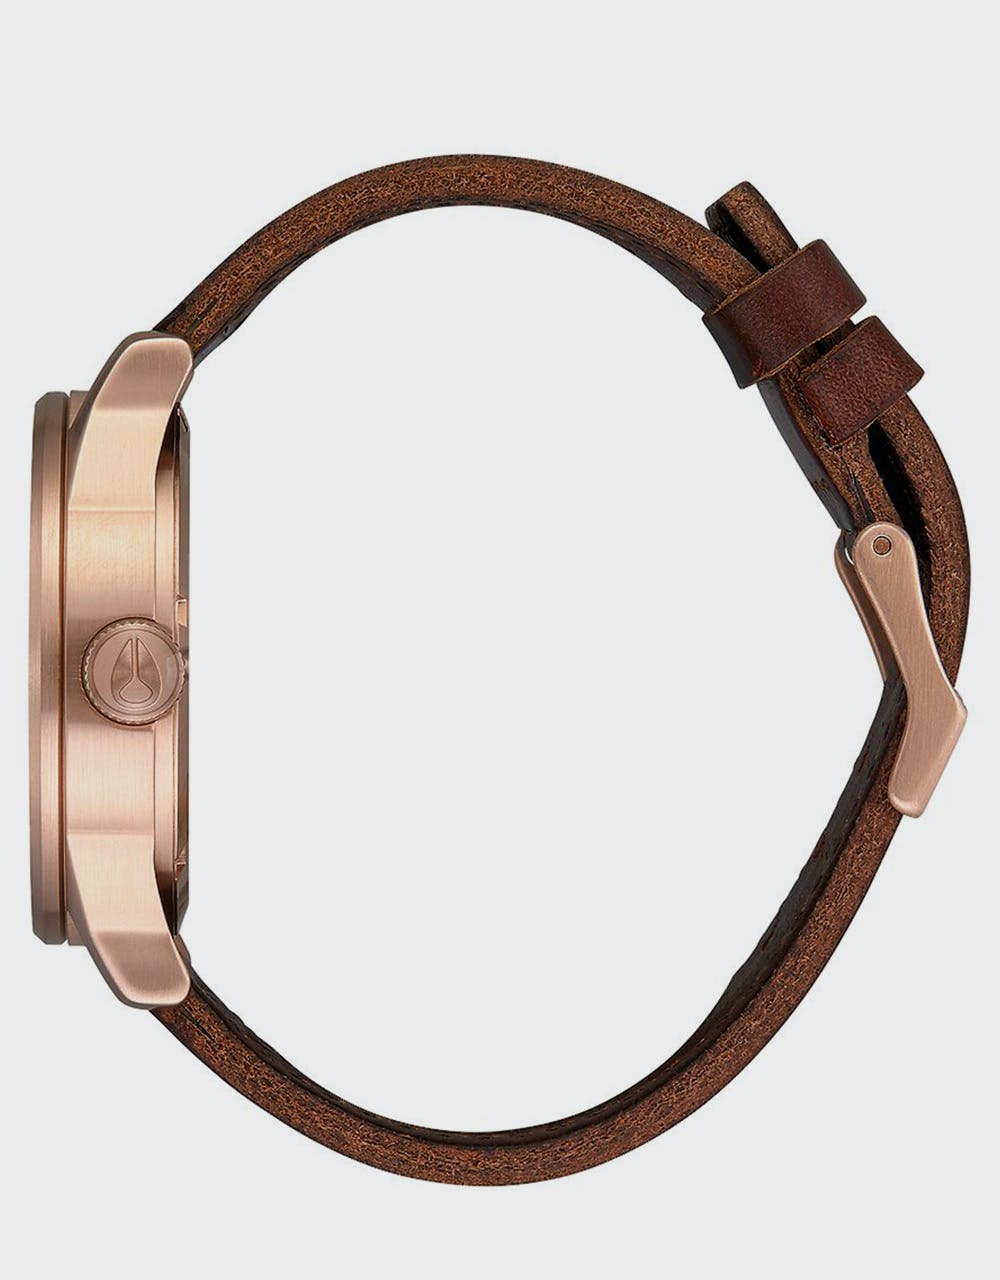 Nixon Sentry Leather Watch - Rose Gold/Navy/Brown